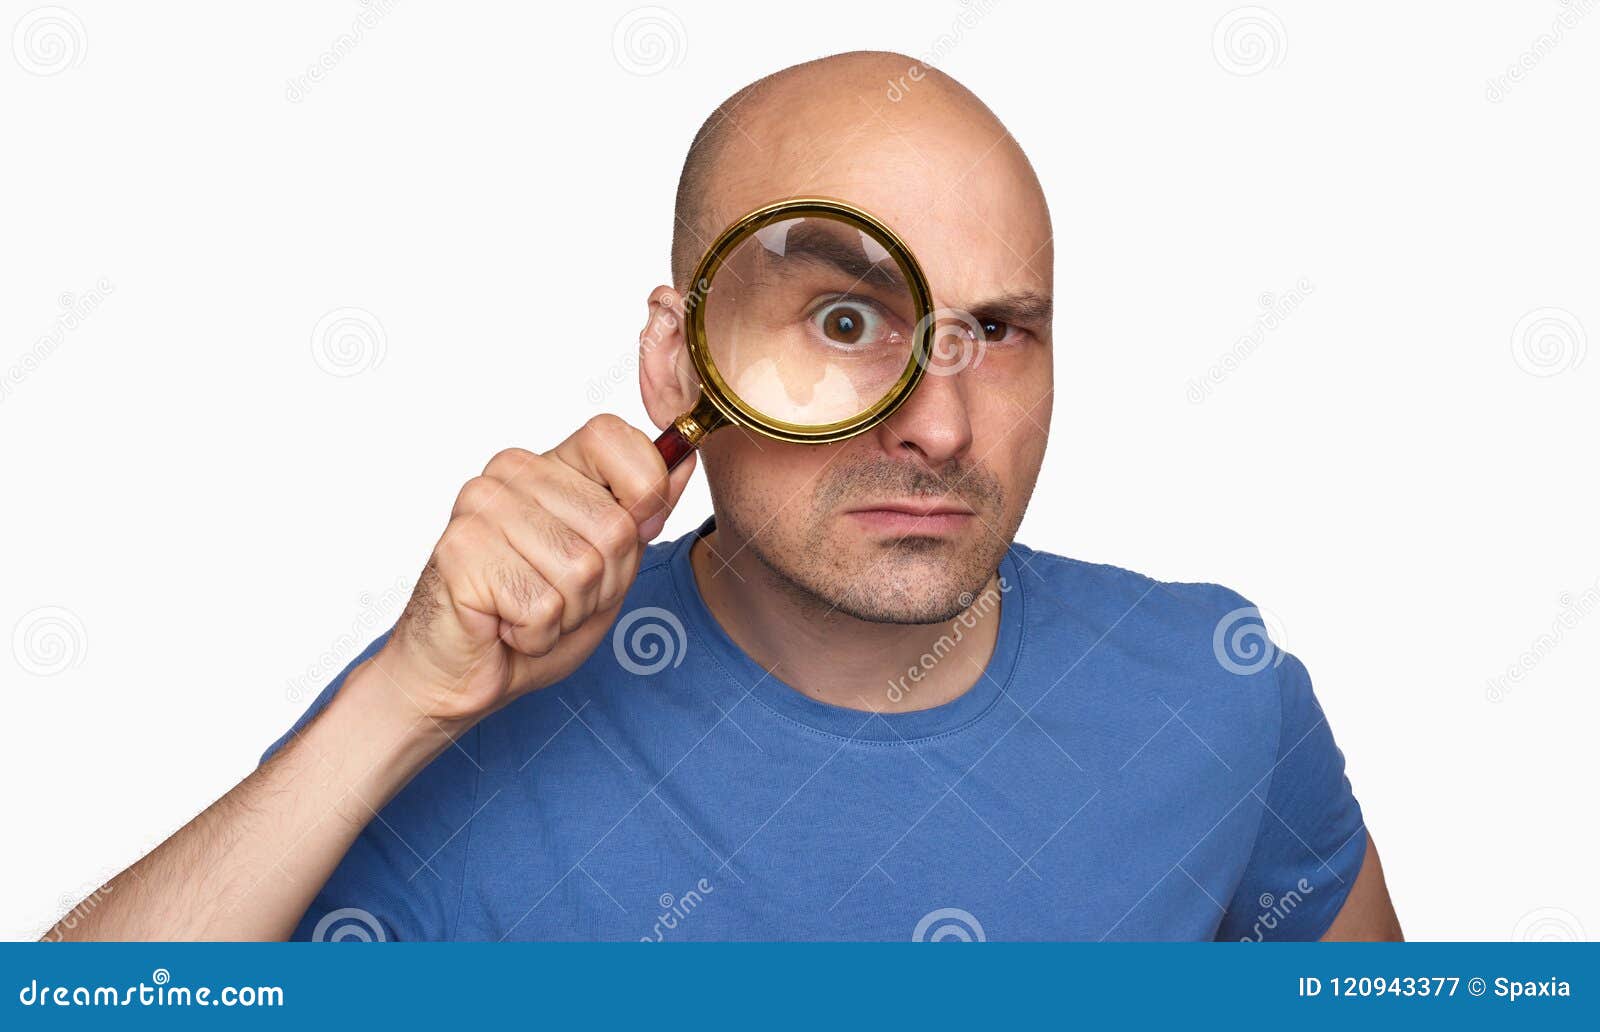 Funny Man Looking at You through Magnifier Stock Image - Image of angry,  people: 120943377